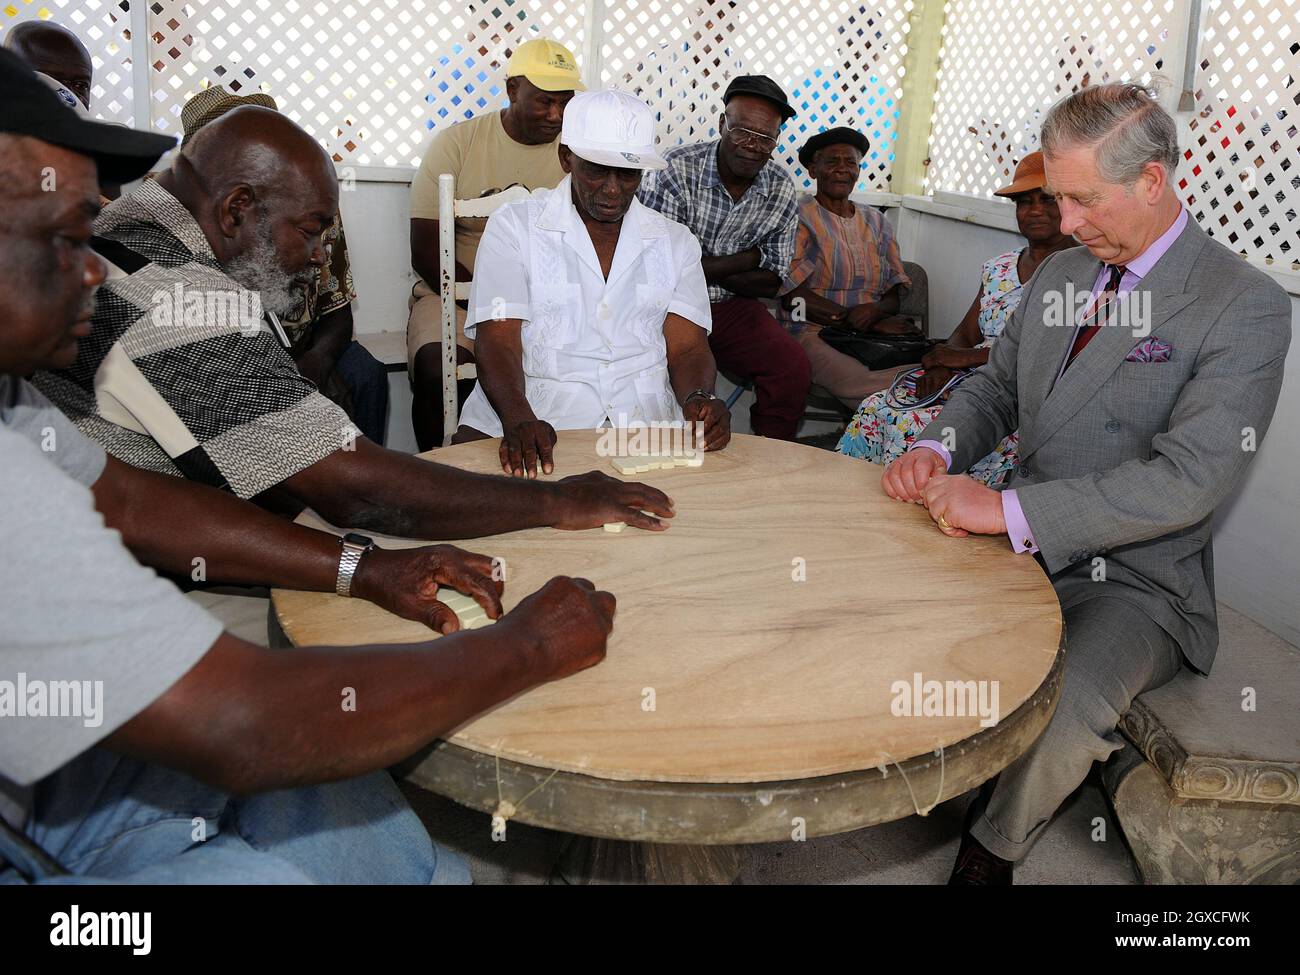 Prince Charles, Prince of Wales plays a game of dominoes with local men at a community centre in Montserrat on March 8, 2008. *** Local Caption *** Stock Photo